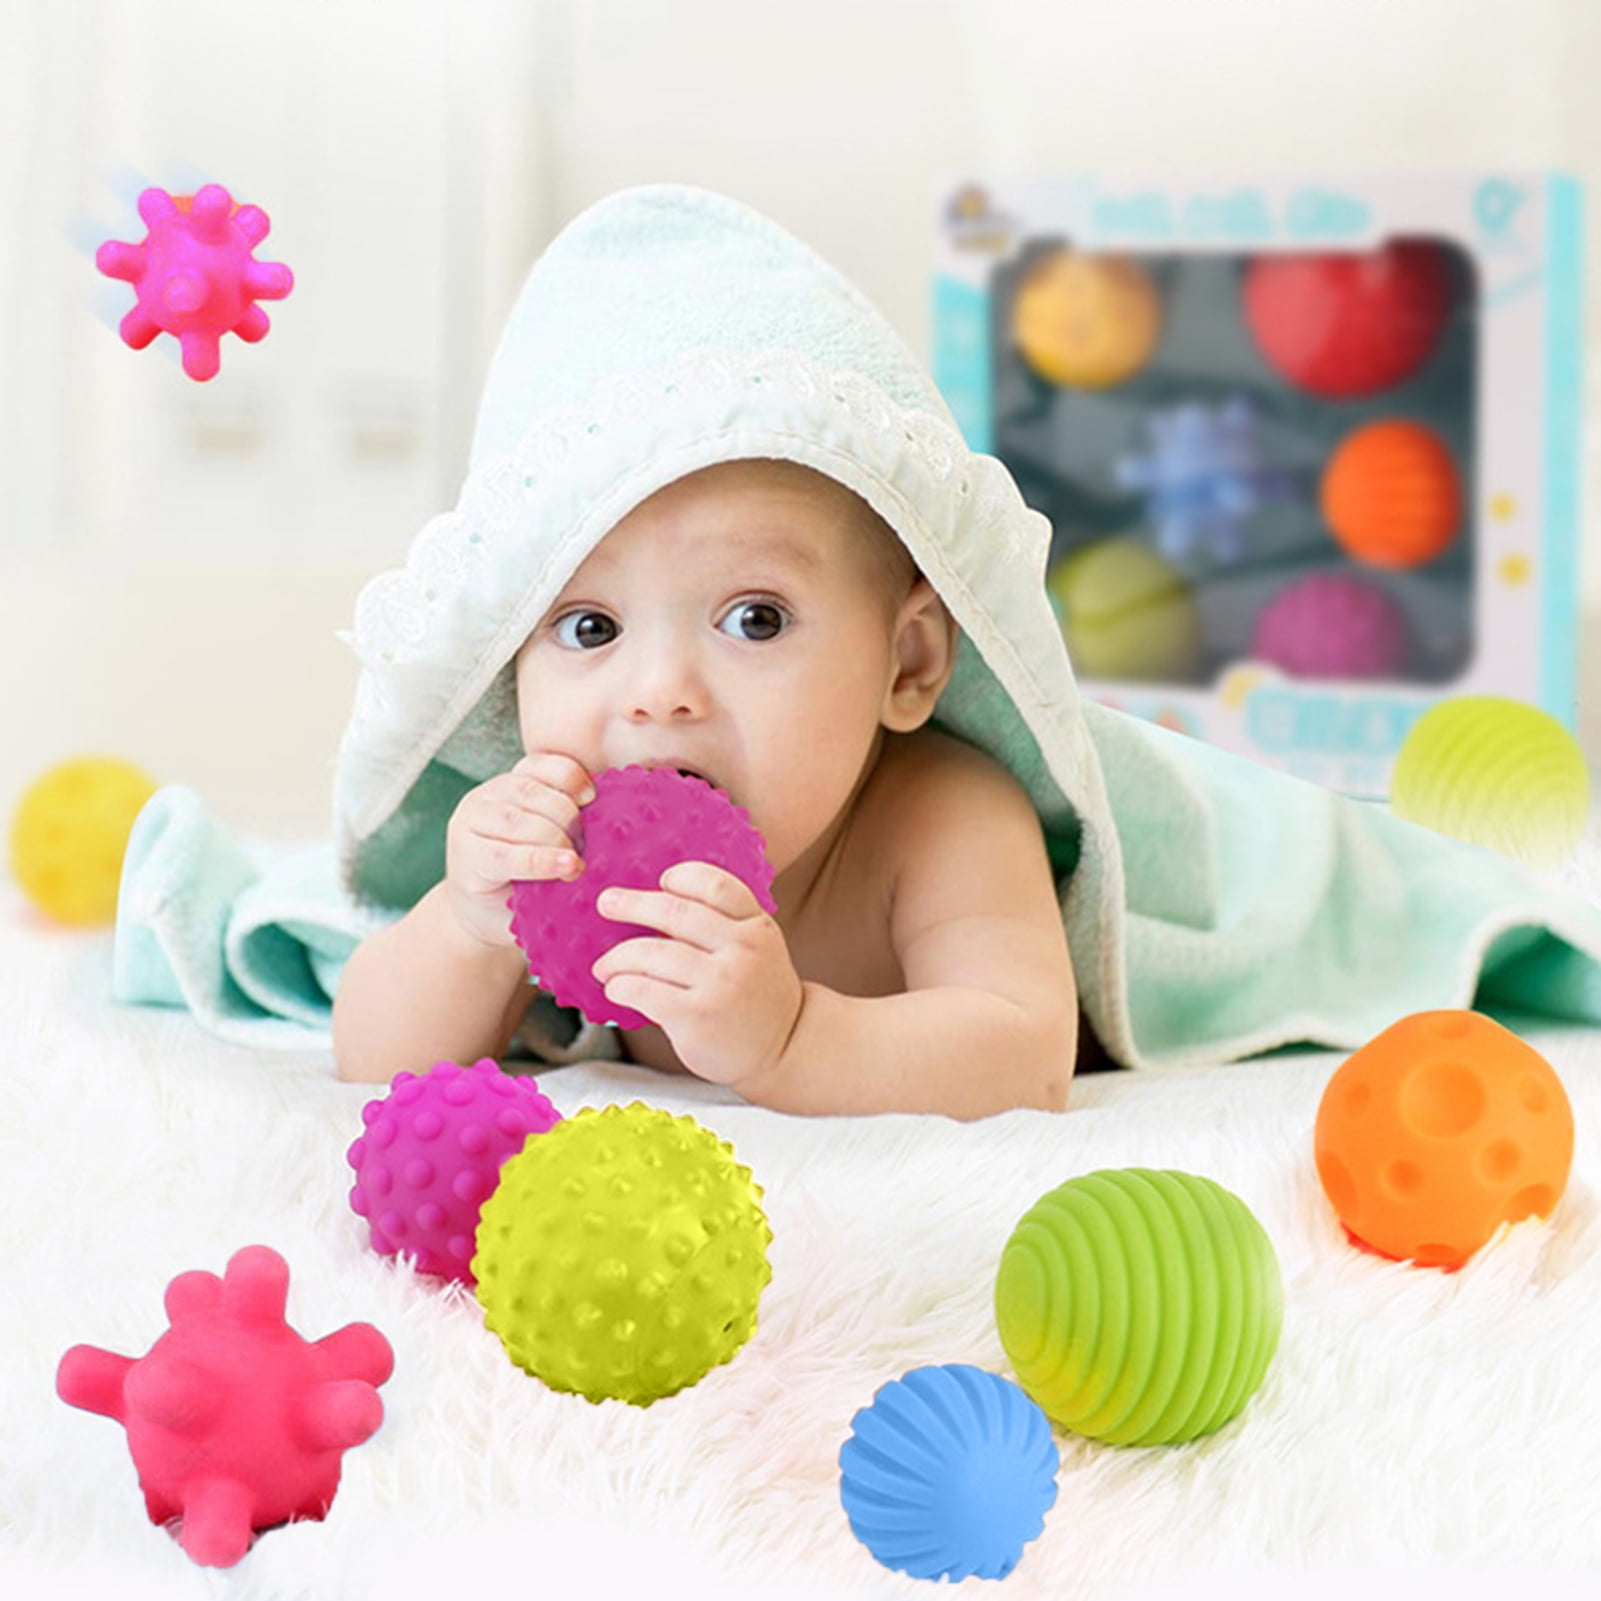 6PCS SENSORY TOUCH MULTIPLE TEXTURED BABY BALLS WITH BB SOUND BATH EDUCATION TOY